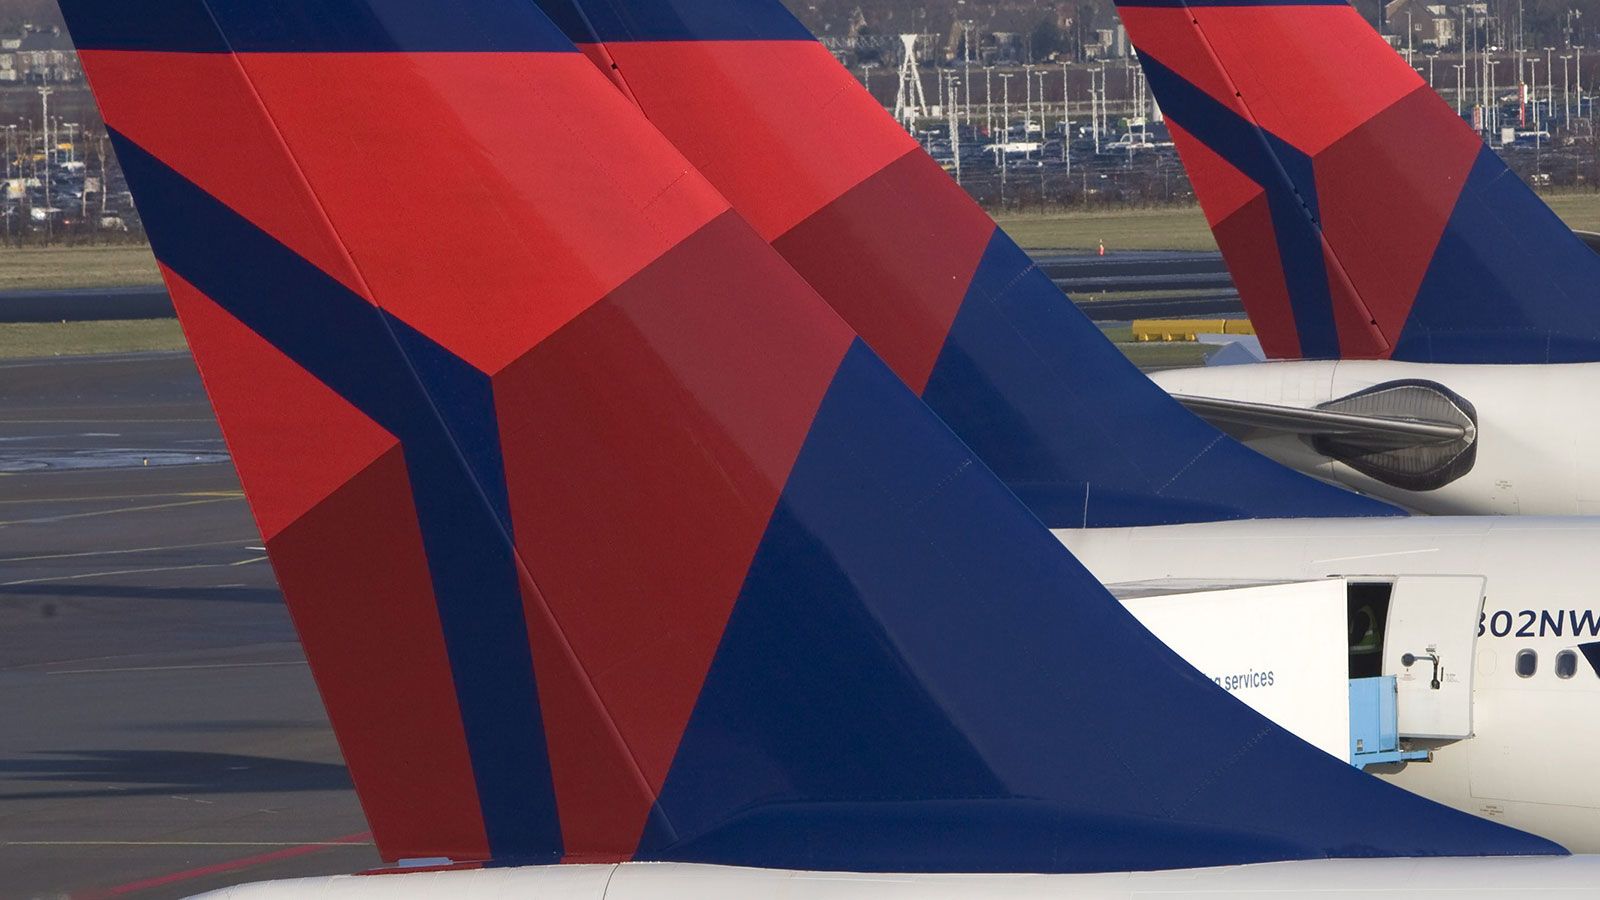 Delta Air LInes planes at Schiphol Airport near Amsterdam are shown in this file photo.